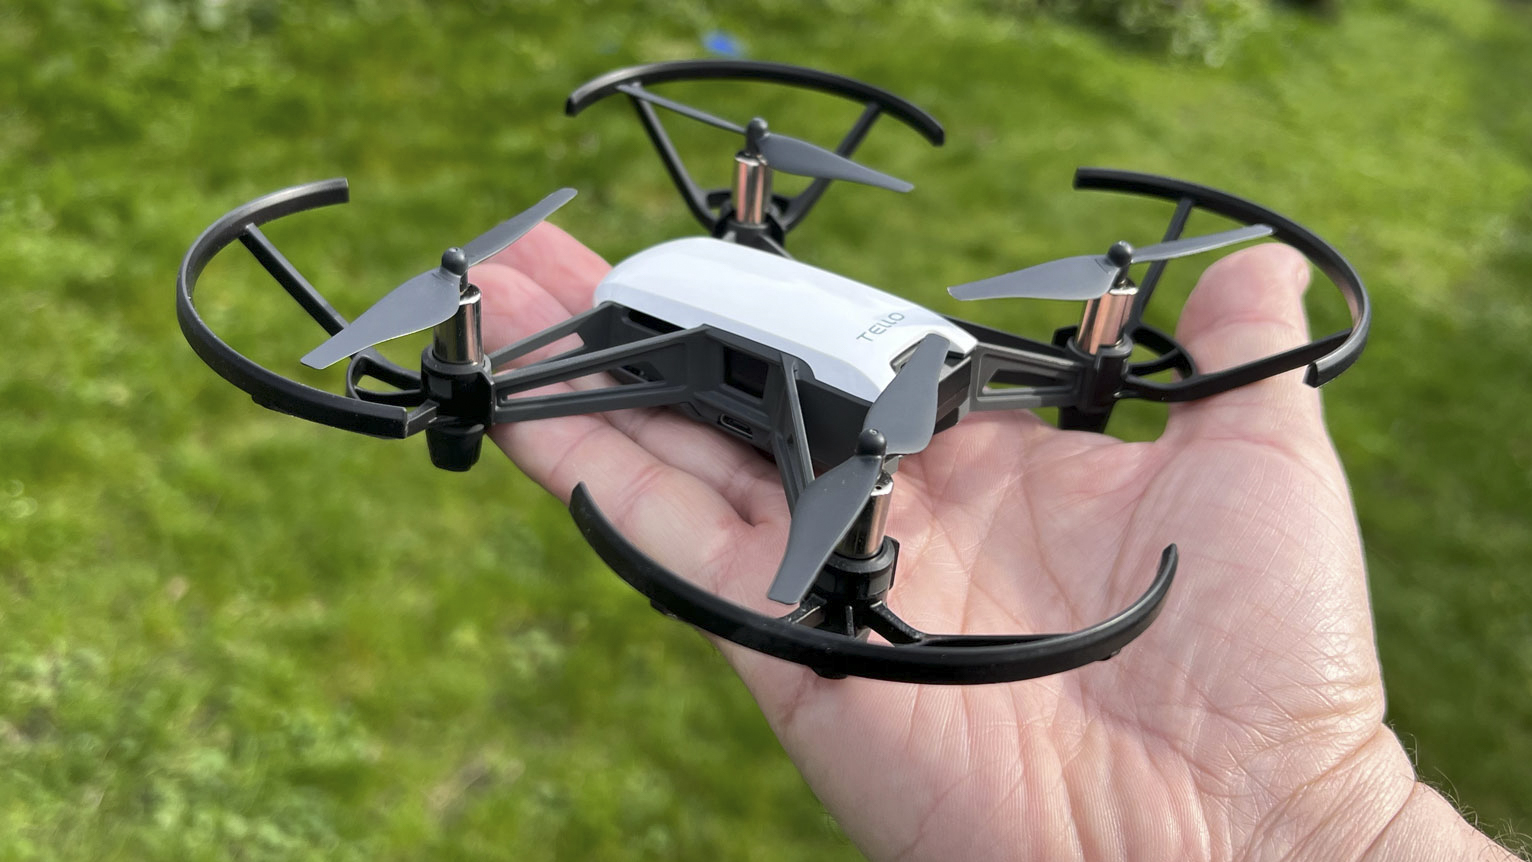 DJI Mini 2 SE Drone Now More Accessible Than Ever With $40 Off